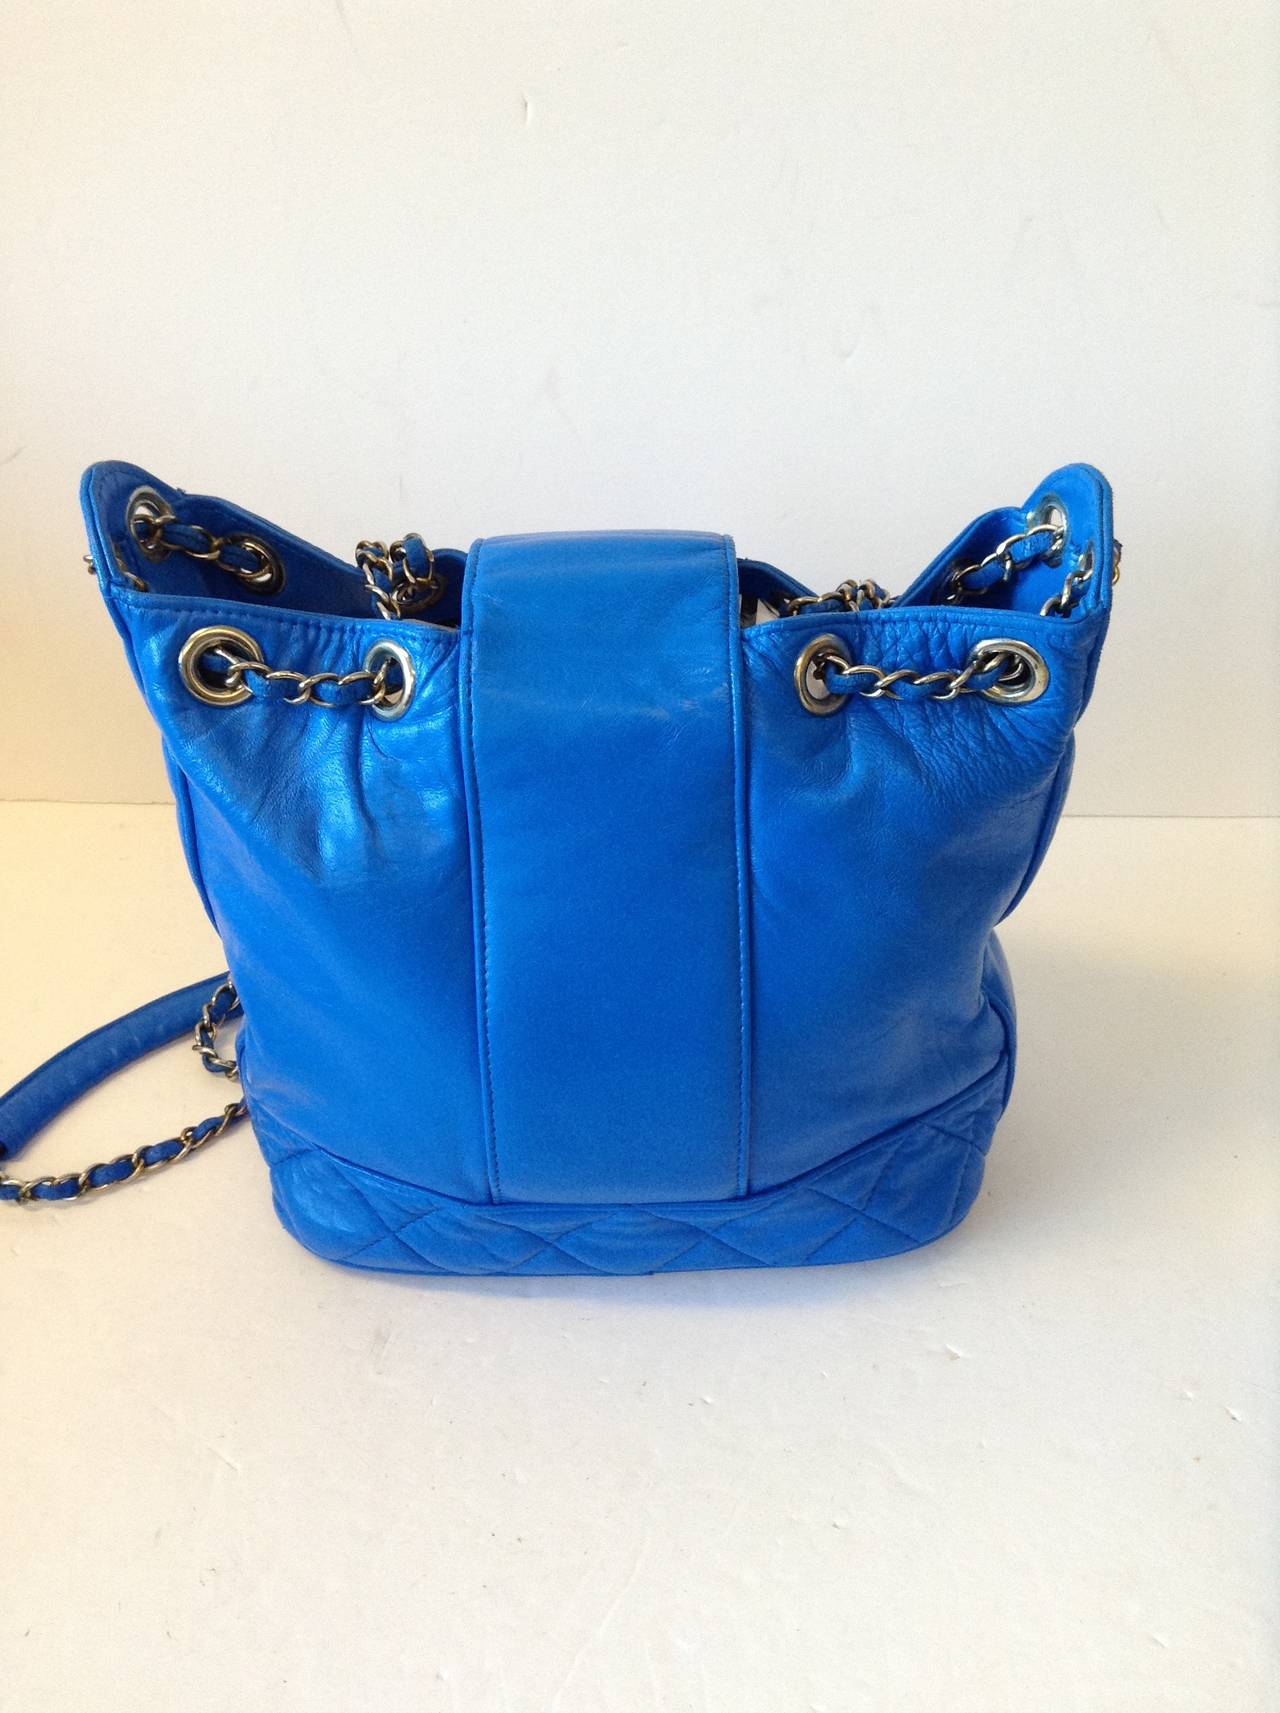 Chanel Electric Blue Large Drawstring Bucket Bag with Flap Closure In Good Condition For Sale In Westmount, Quebec